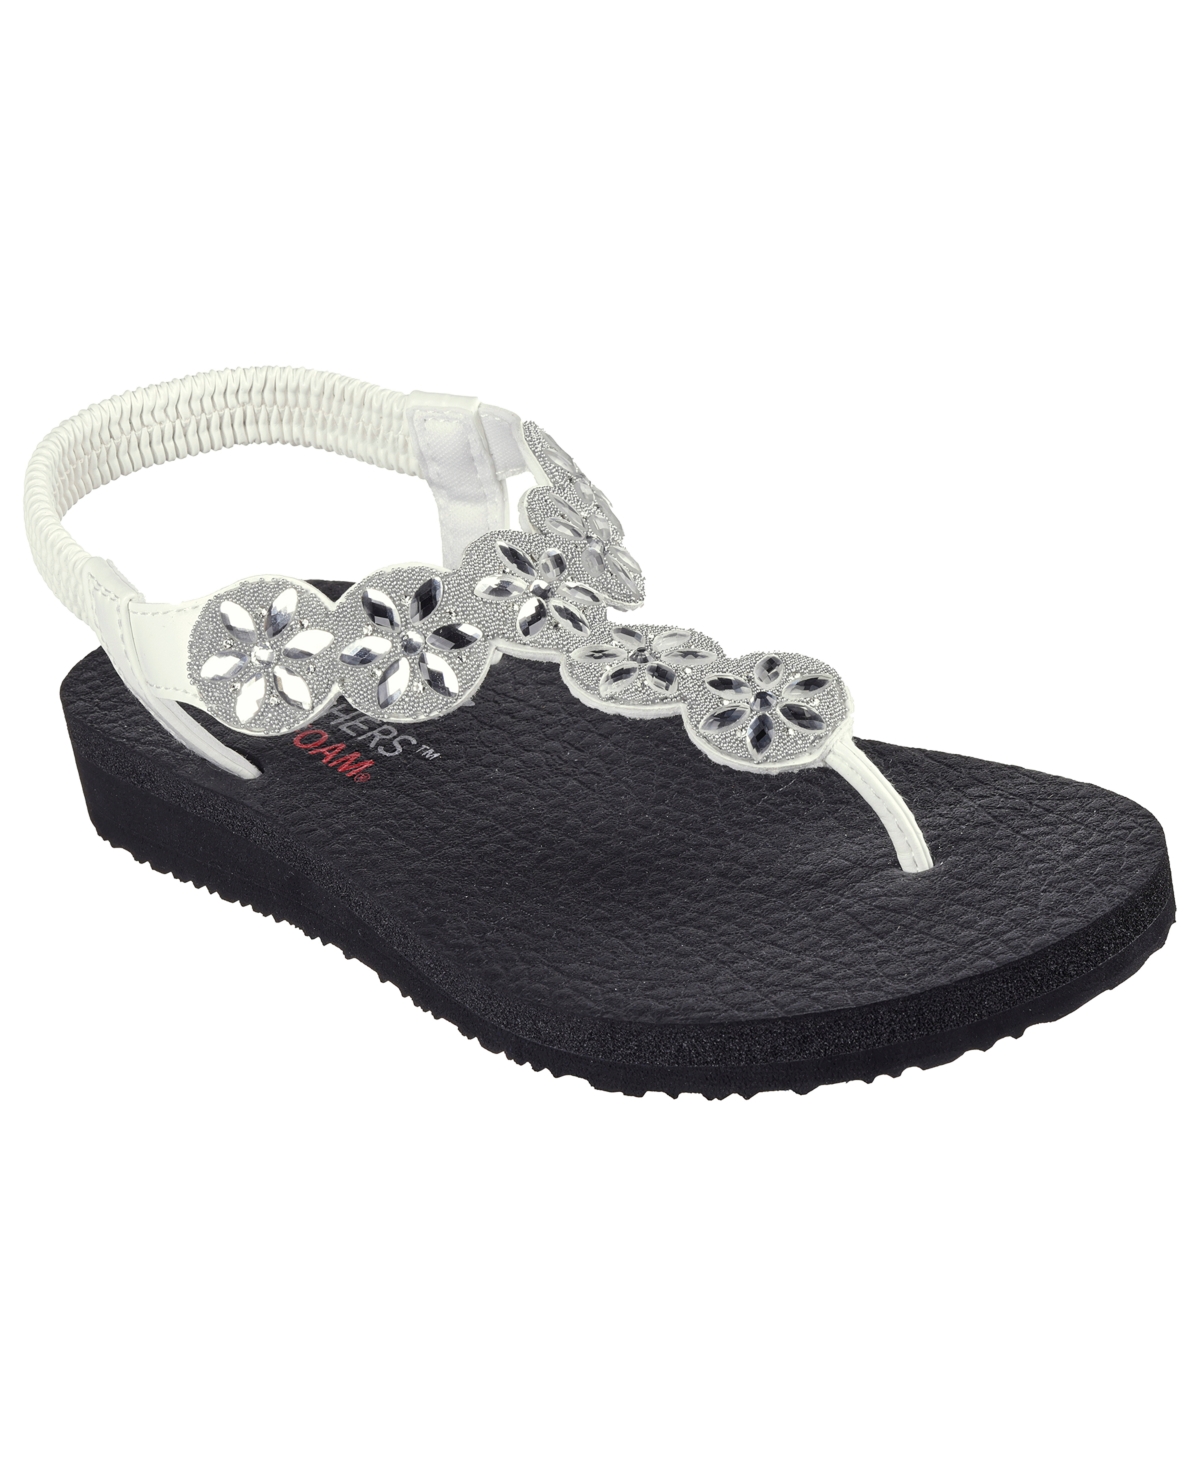 Women's Cali Meditation - Sparkly Fleur Thong Sandals from Finish Line - White